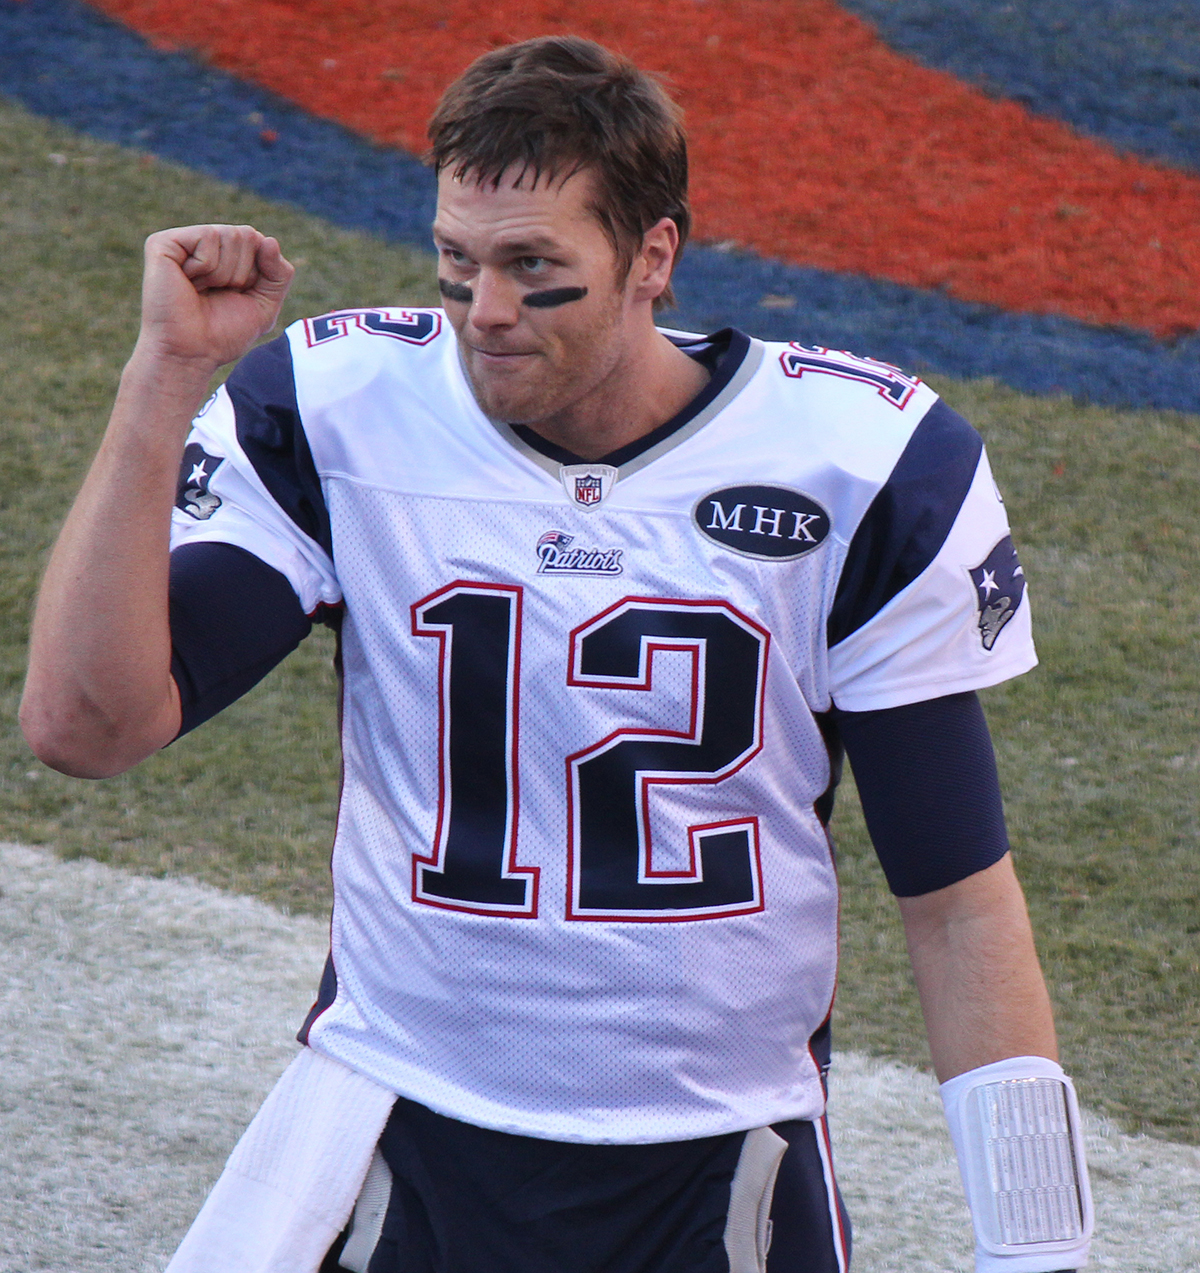 Tom Brady by Jeffrey Beall on Flickr/Creative Commons